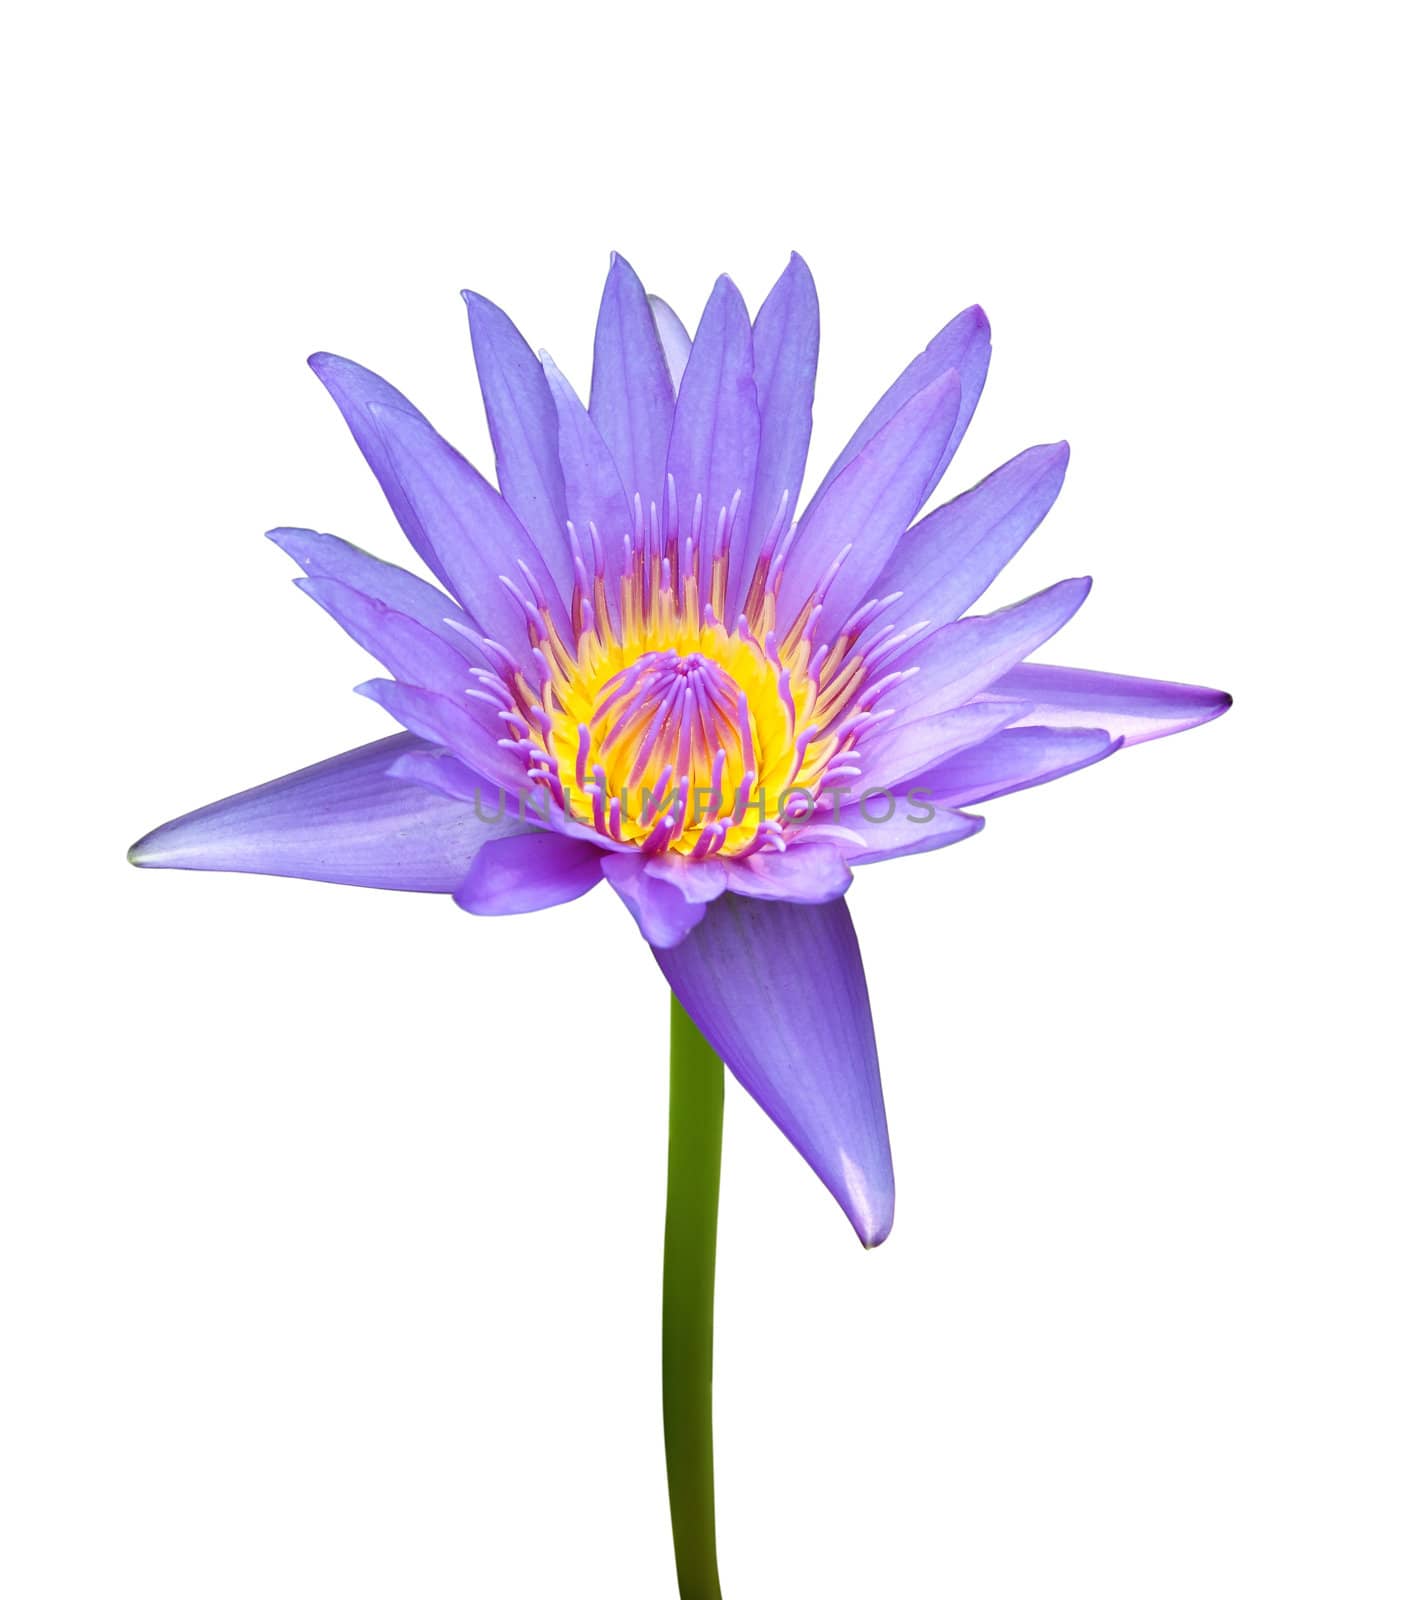 The blooming blue lotus on white background by geargodz